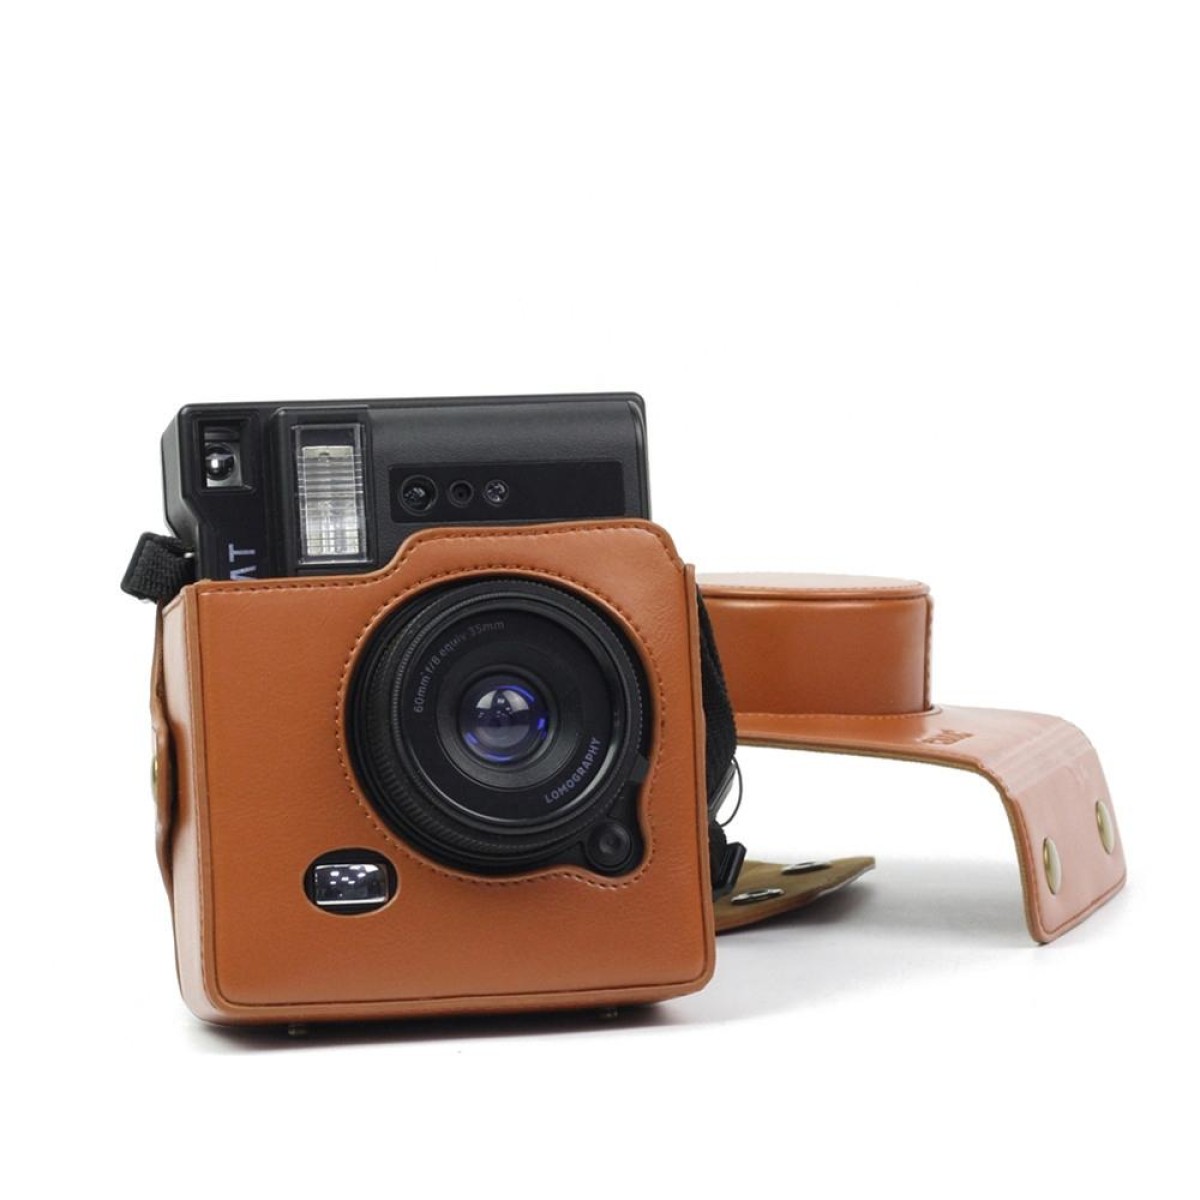 Vintage PU Leather Camera Case Bag For LOMO Automat Instax Camera (Brown)